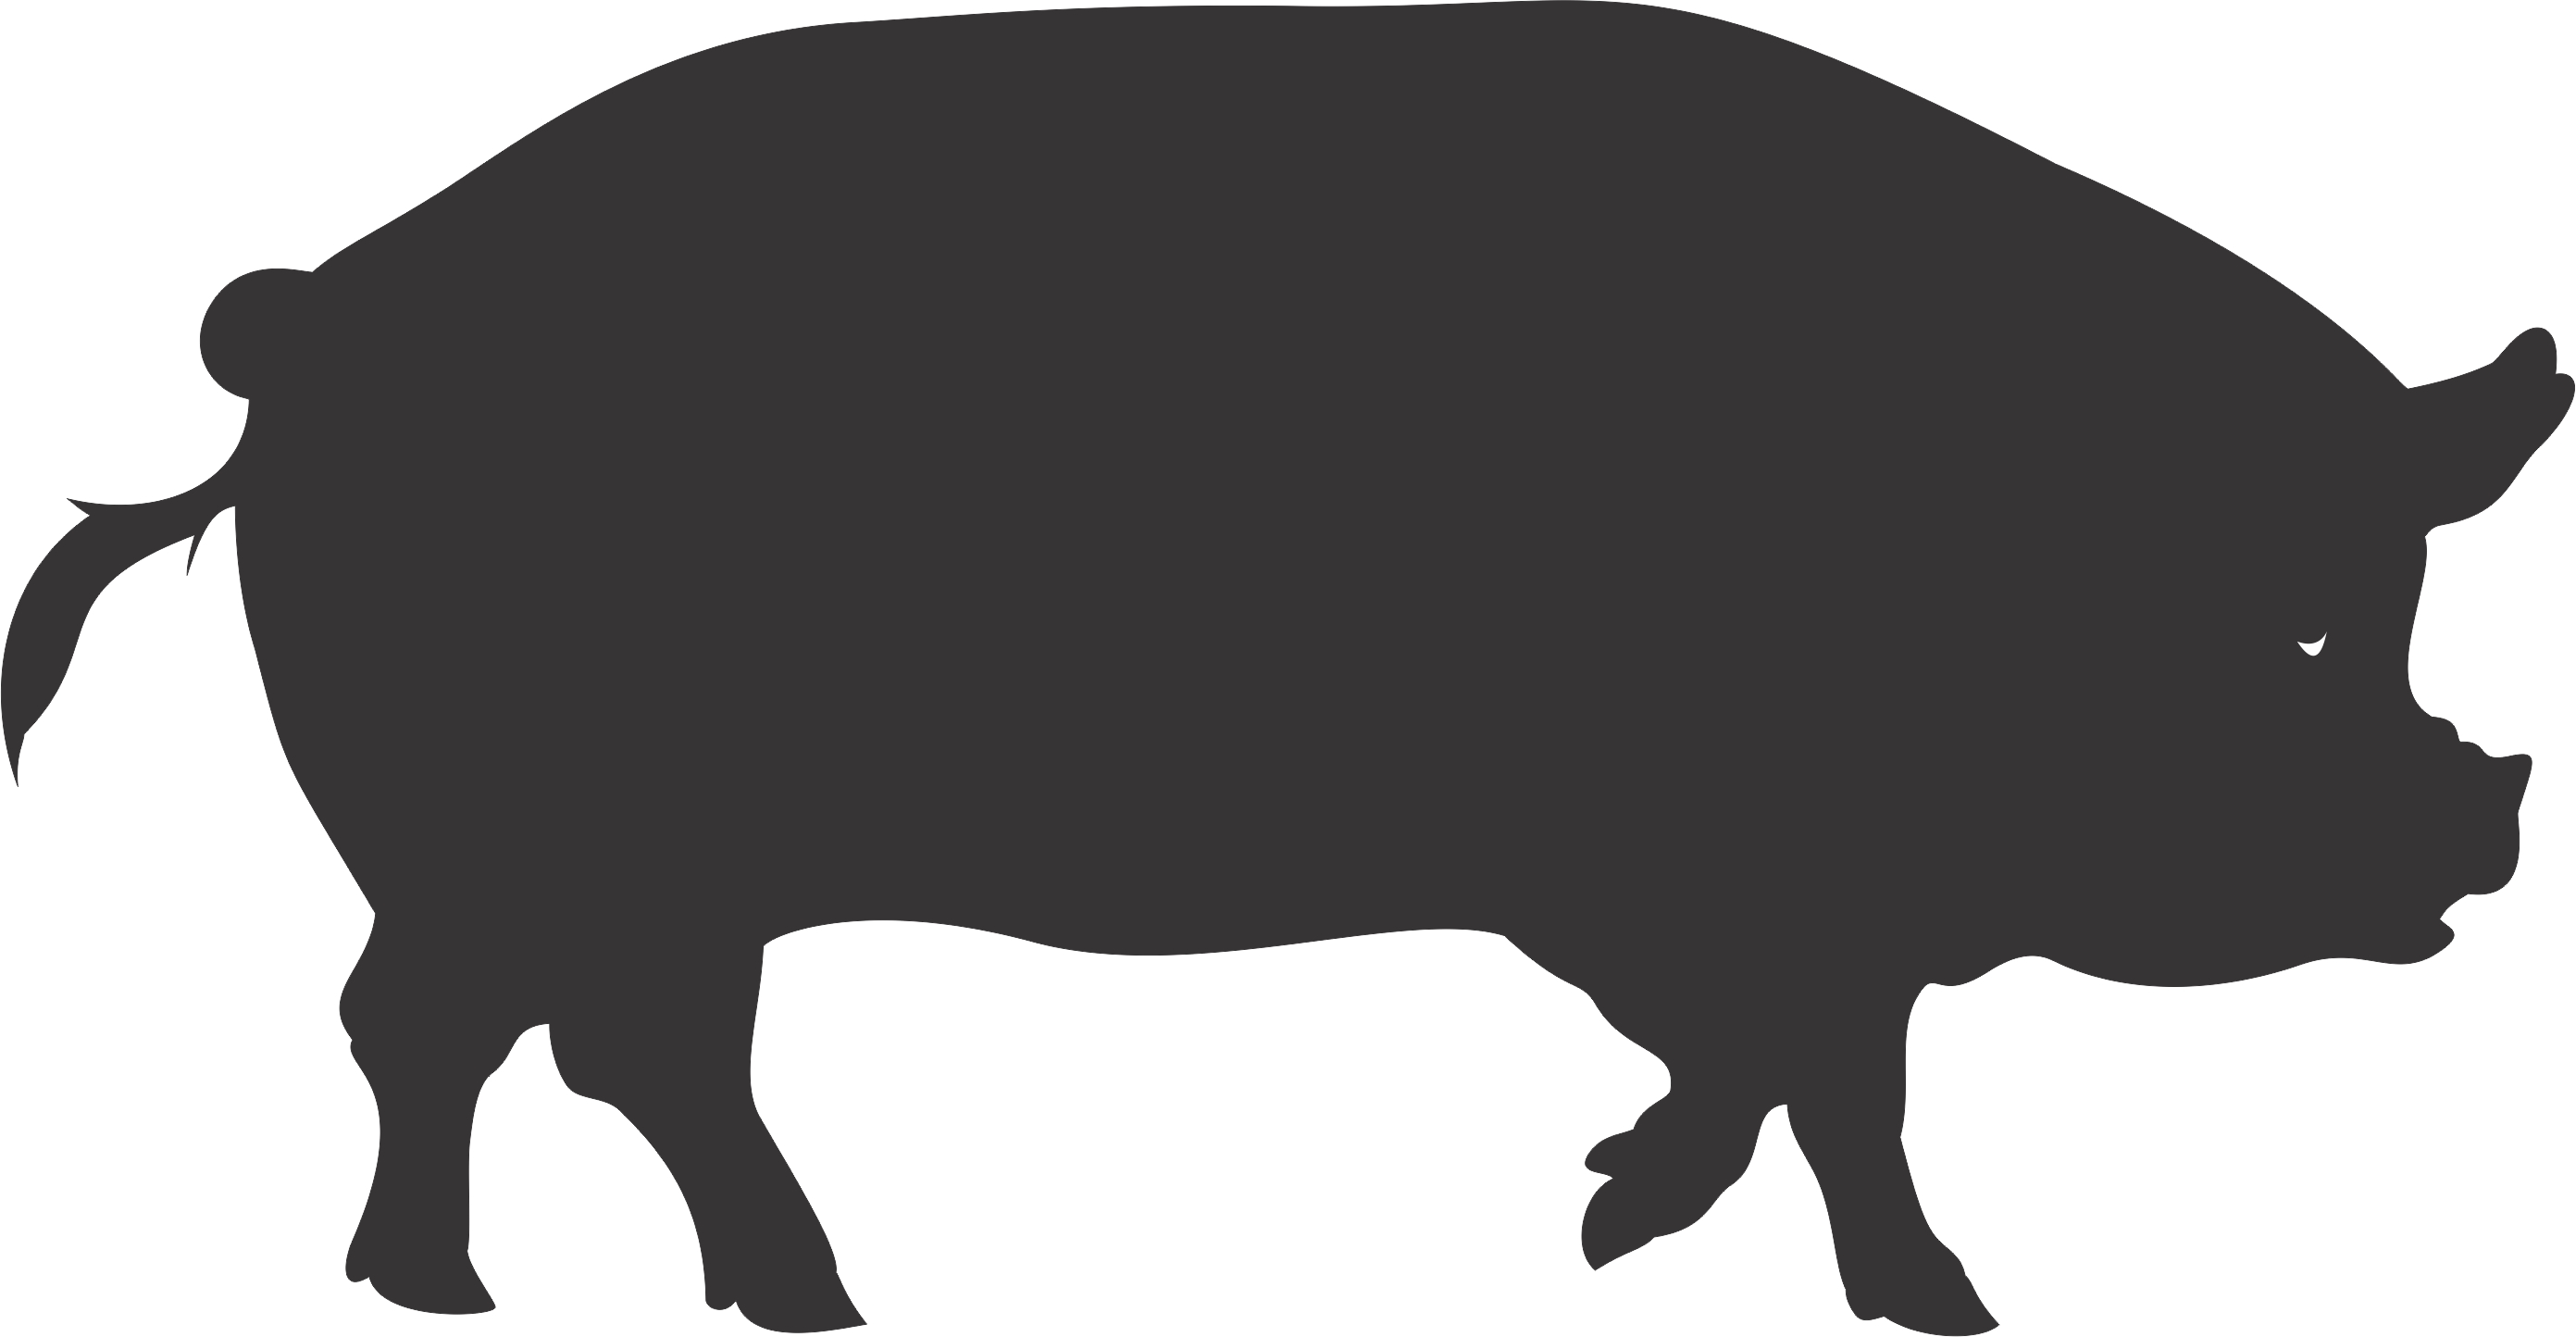 Pig Silhouette - Clipart library